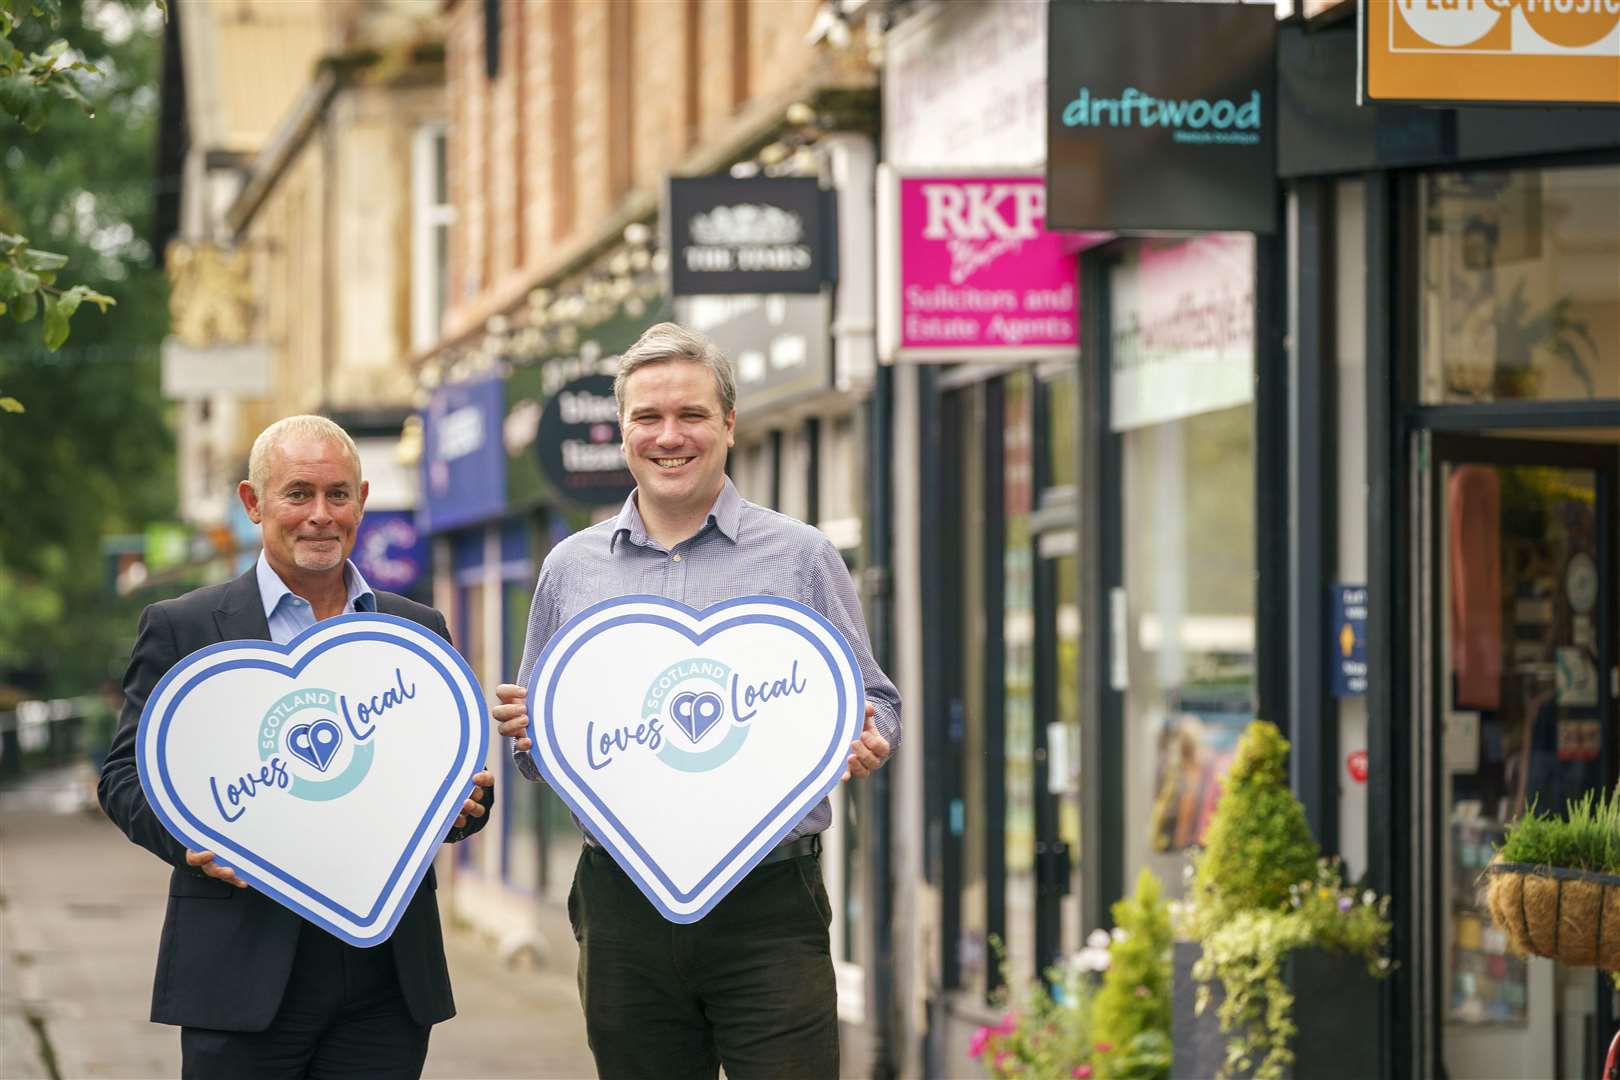 Scotland's Towns Partnership Chief Officer Phil Prentice and minister for community wealth Tom Arthur hope the grants will spur on schemes.